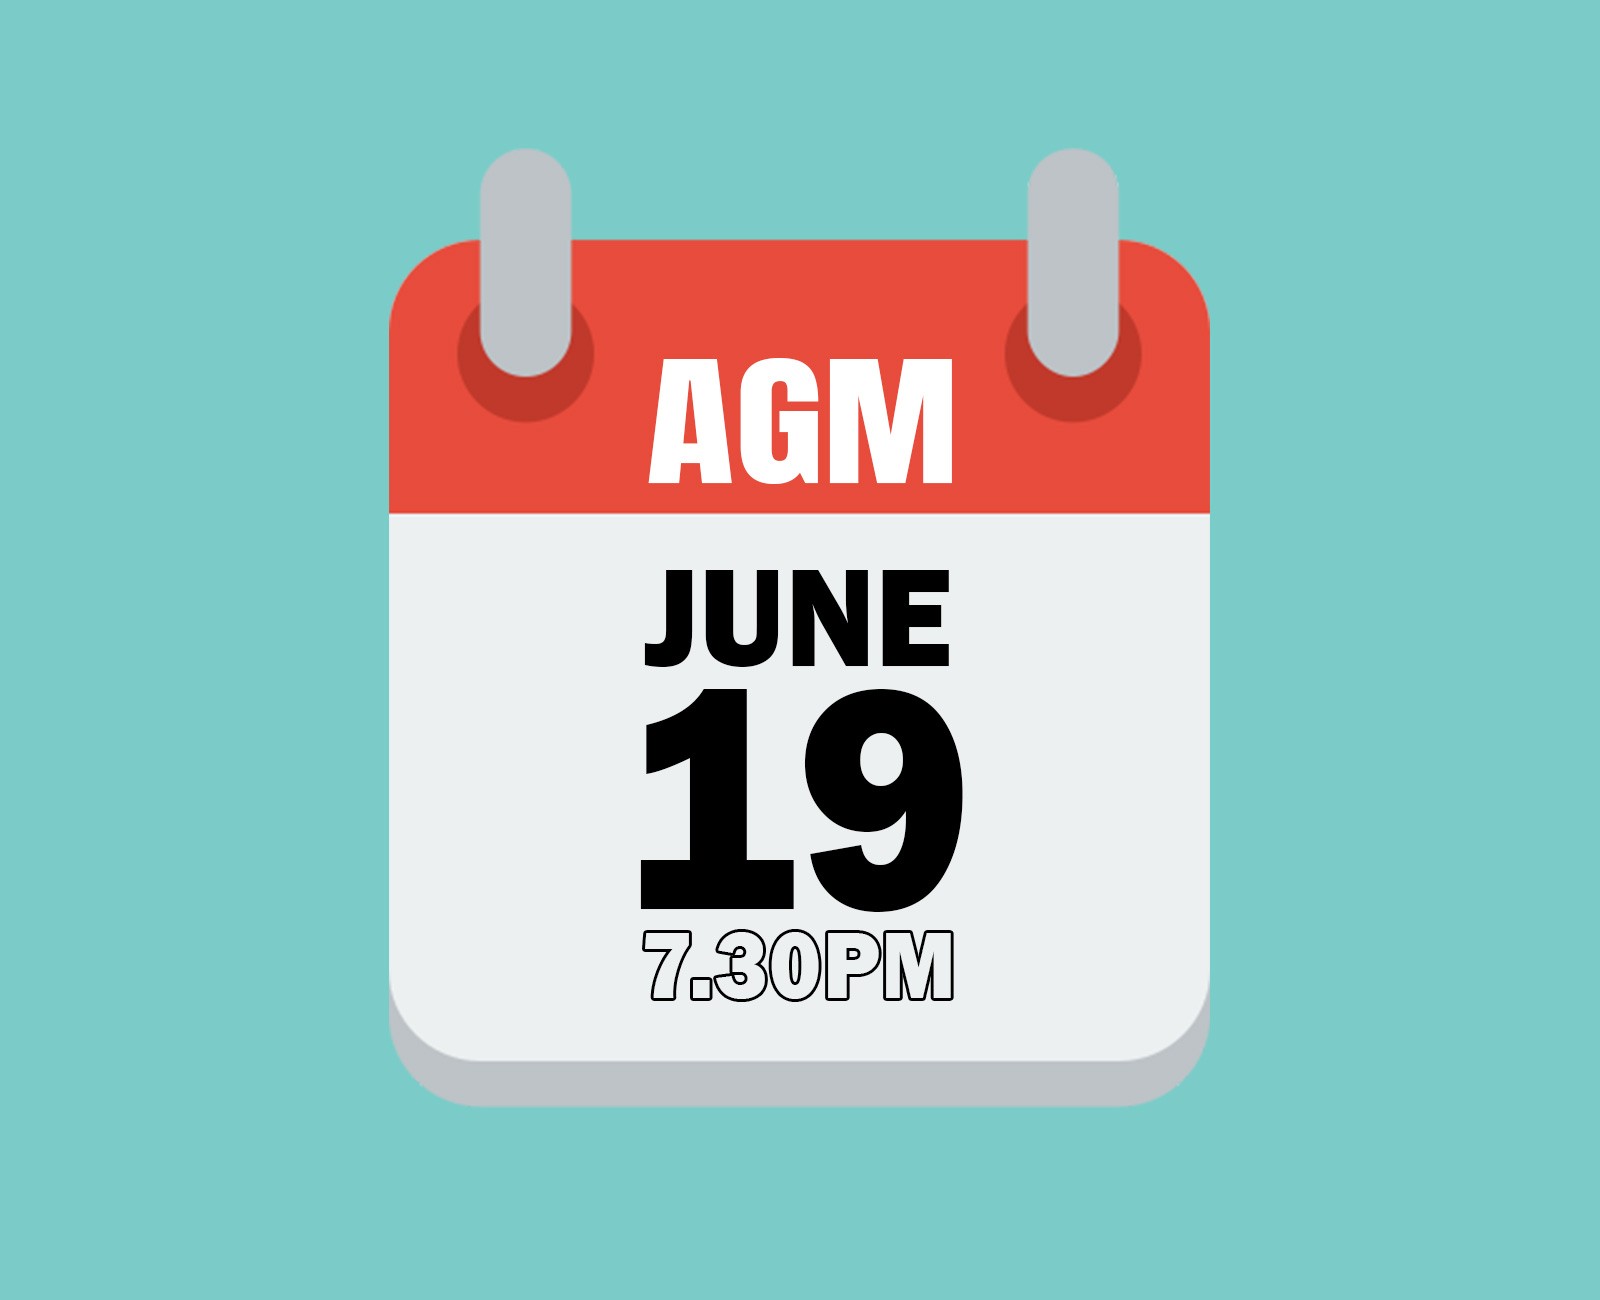 AGM and presentation date confirmed for Wednesday 19th June